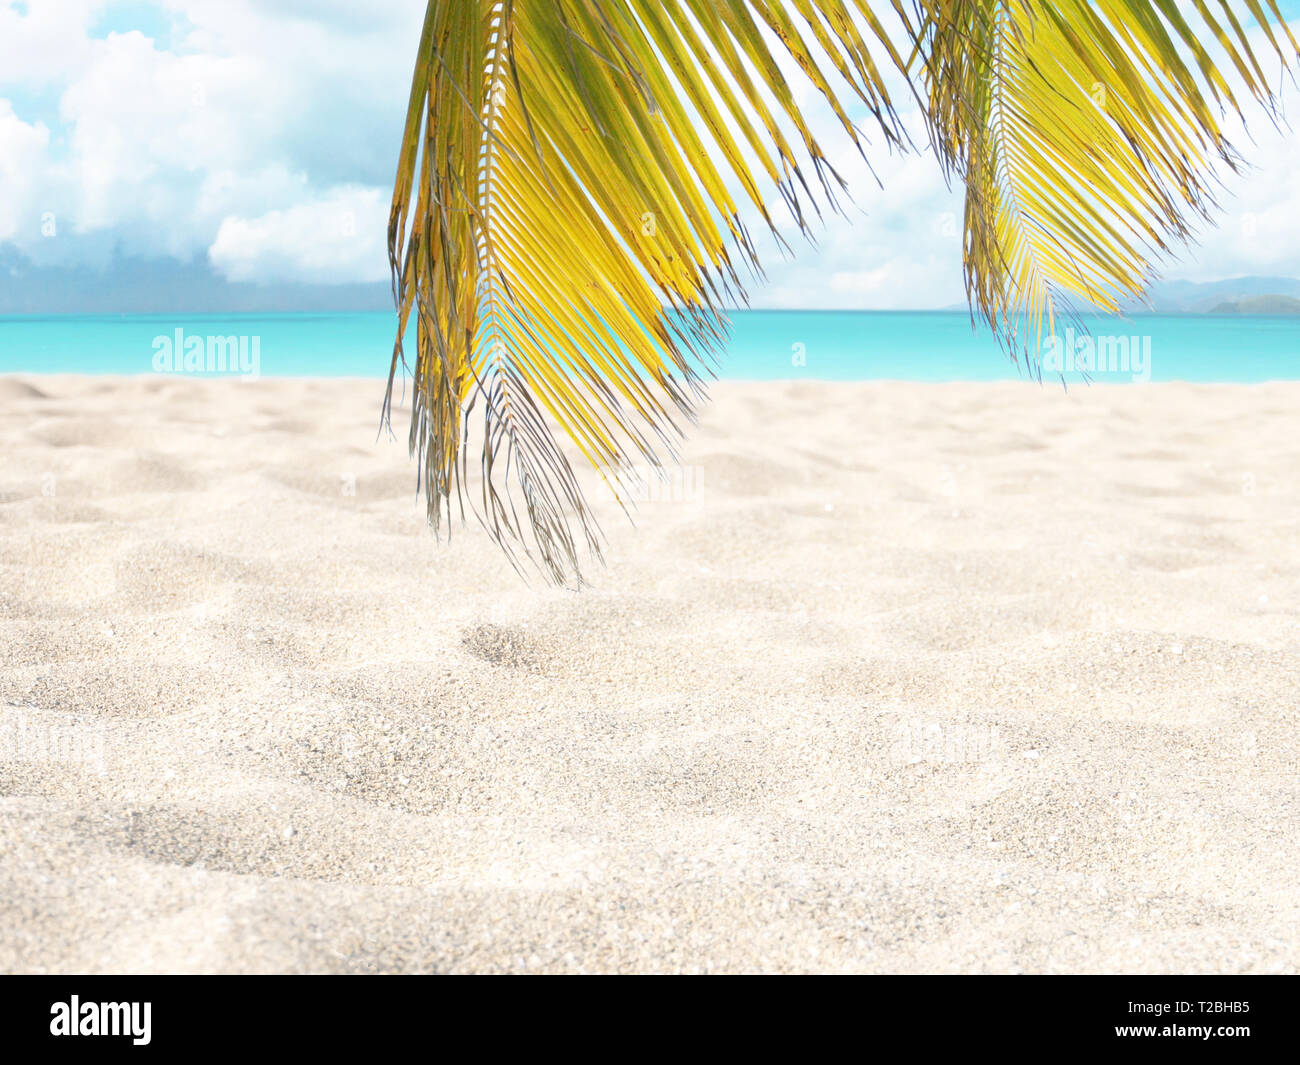 Coconut palm leaves hanging over the sandy beach. Tropical island paradise. Bright turquoise ocean water.  Dreams summer vacations destination. Blurre Stock Photo